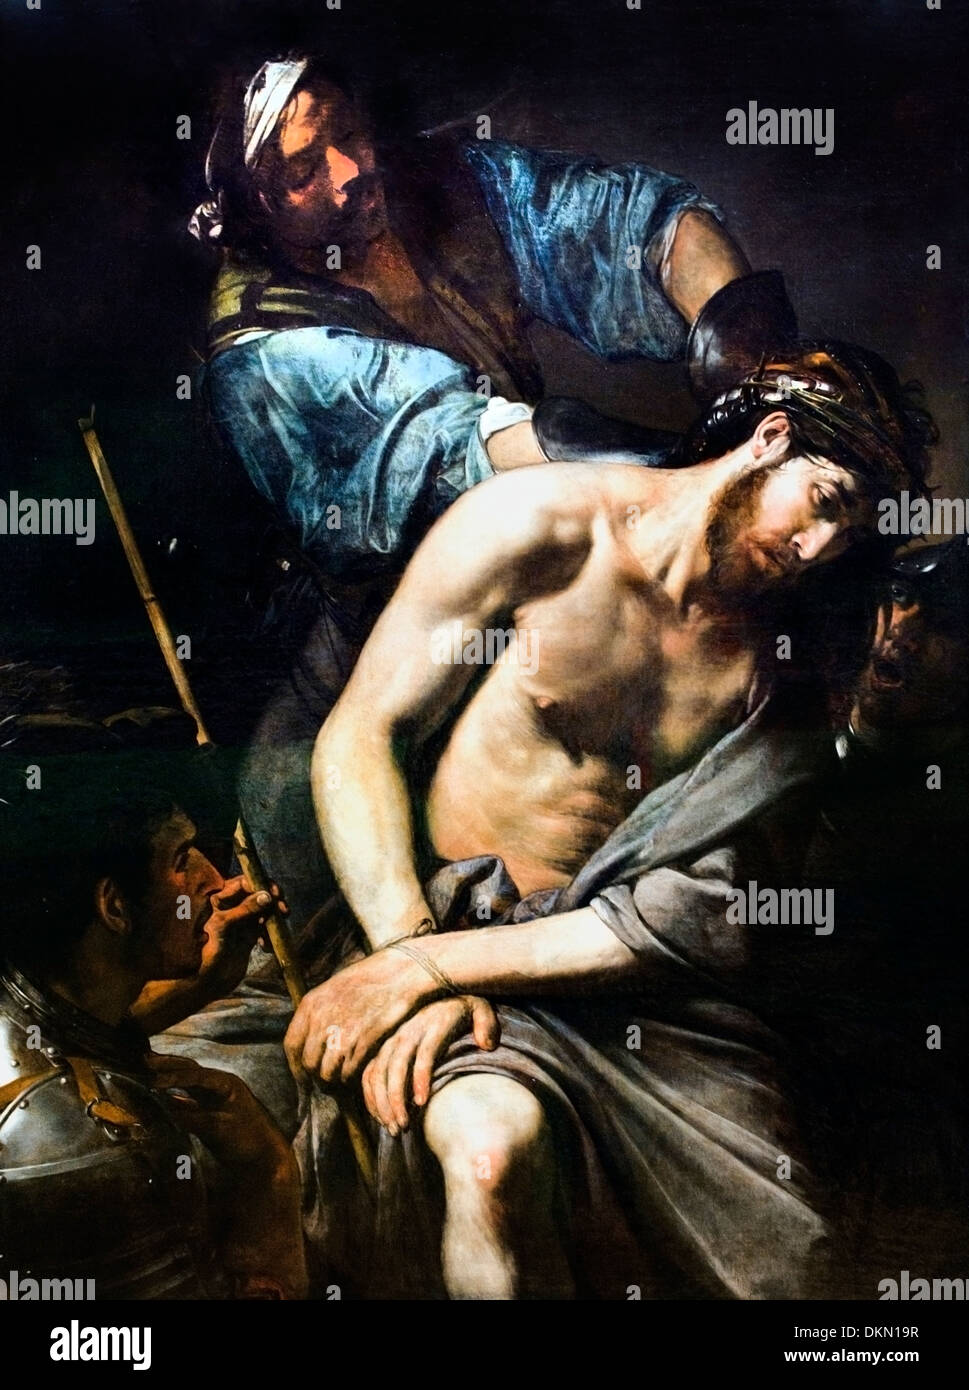 Jean Valentin de Boulogne (1591 - 1632), painting The Crowning with Thorns 1570 France French Stock Photo